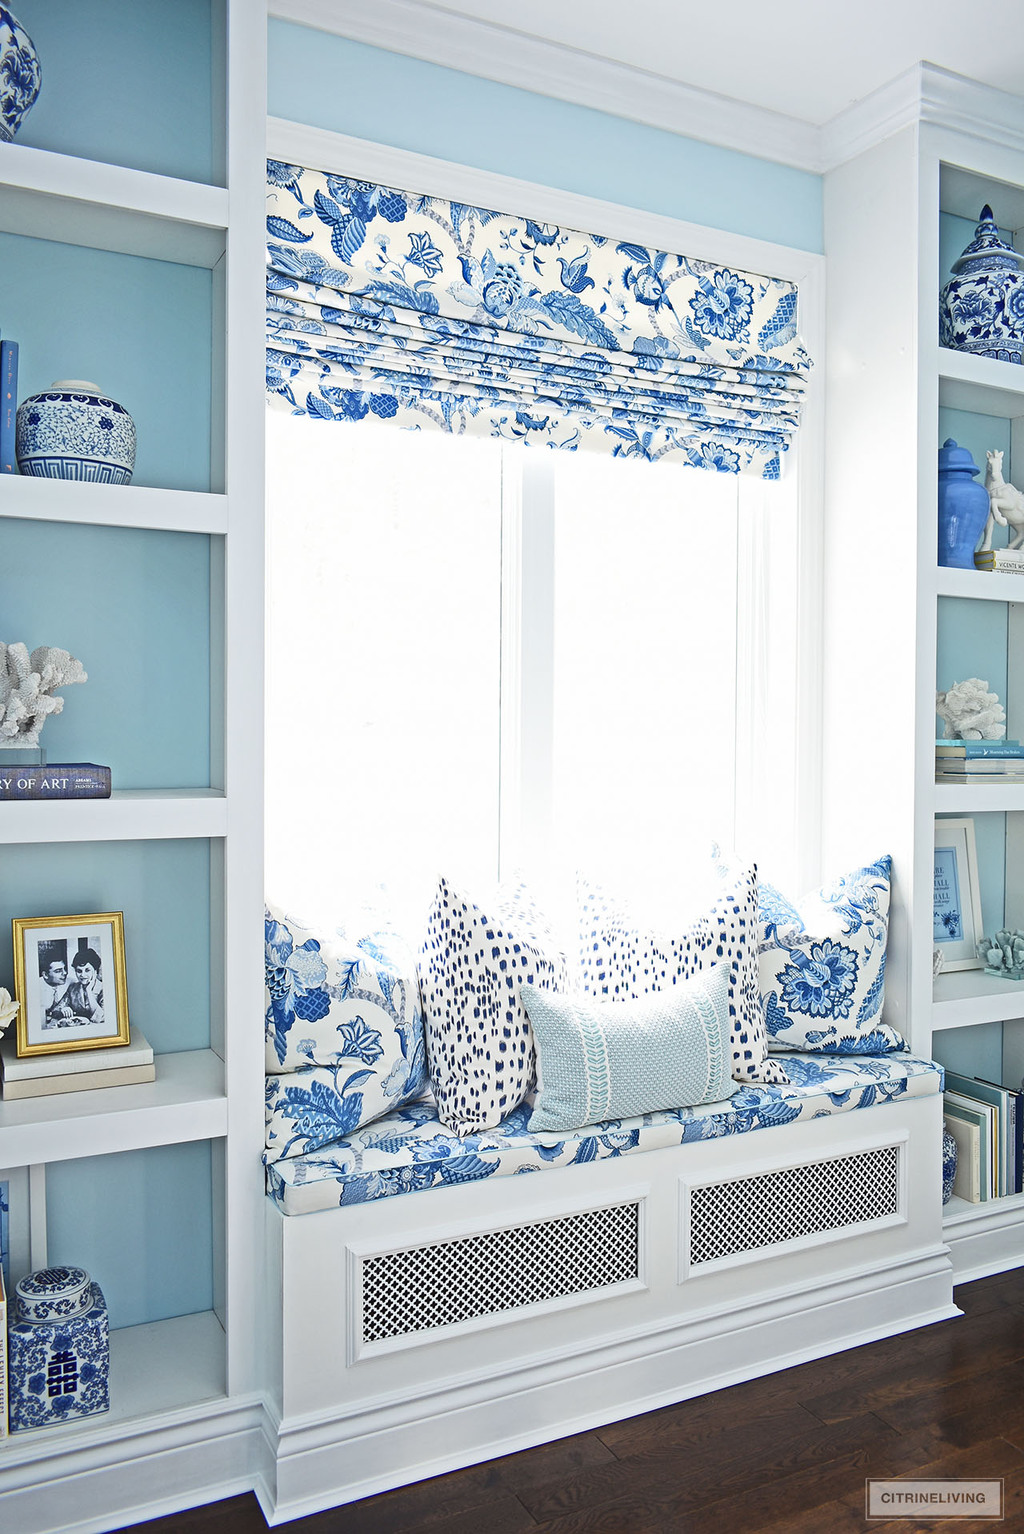 READING NOOK IN ELEGANT HOME OFFICE IN BLUE + WHITE CHINOISERIE